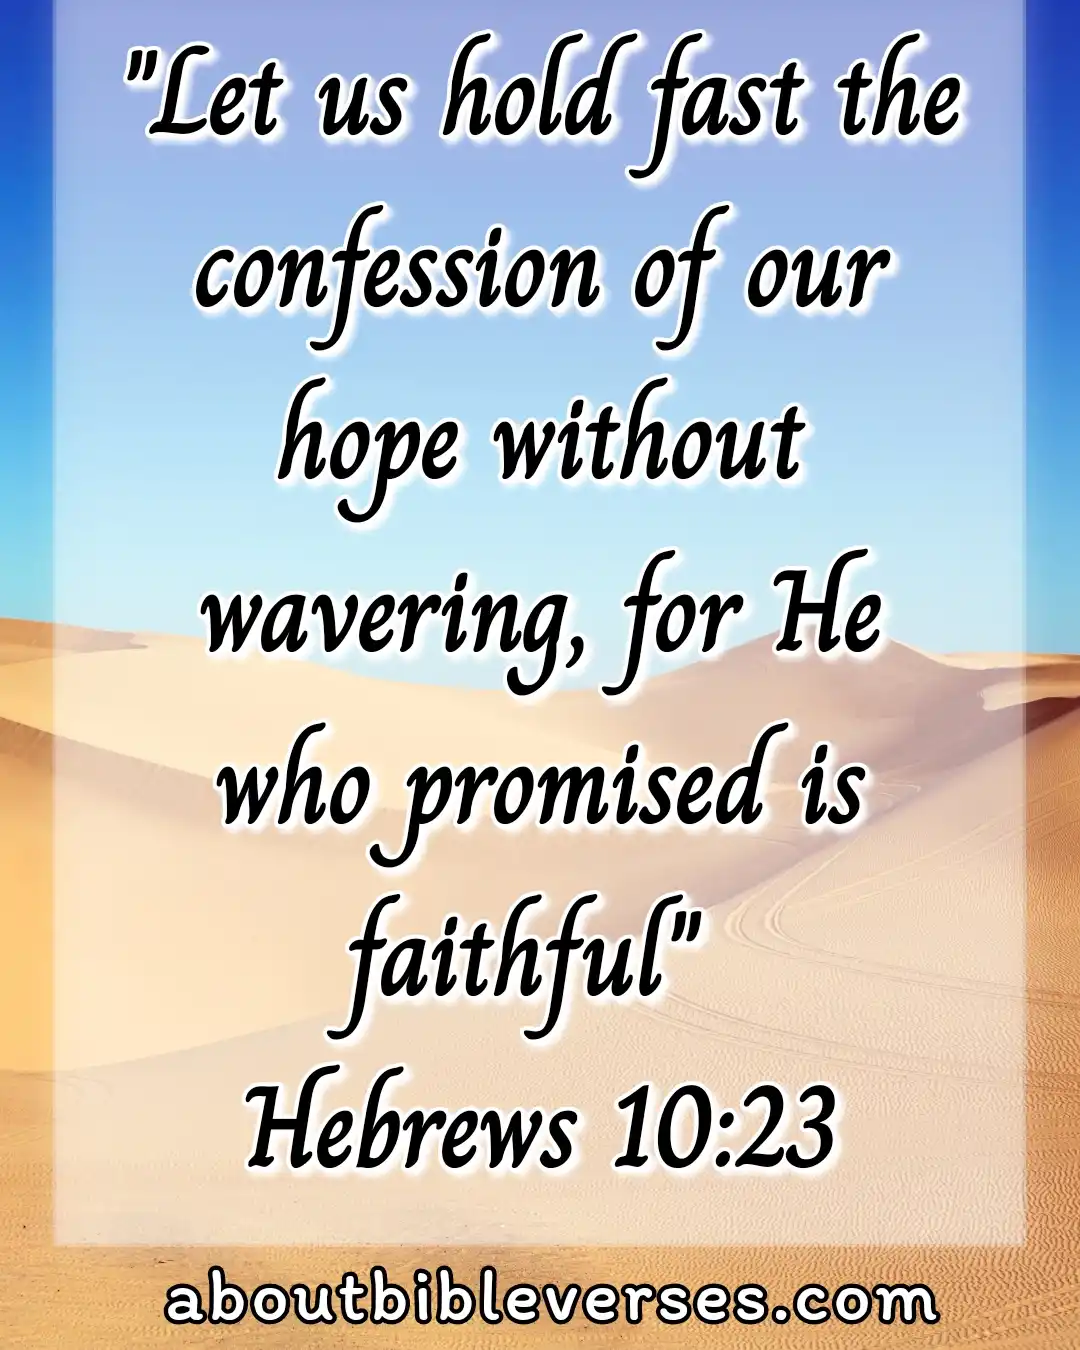 Bible verse about hope for the future (Hebrews 10:23)